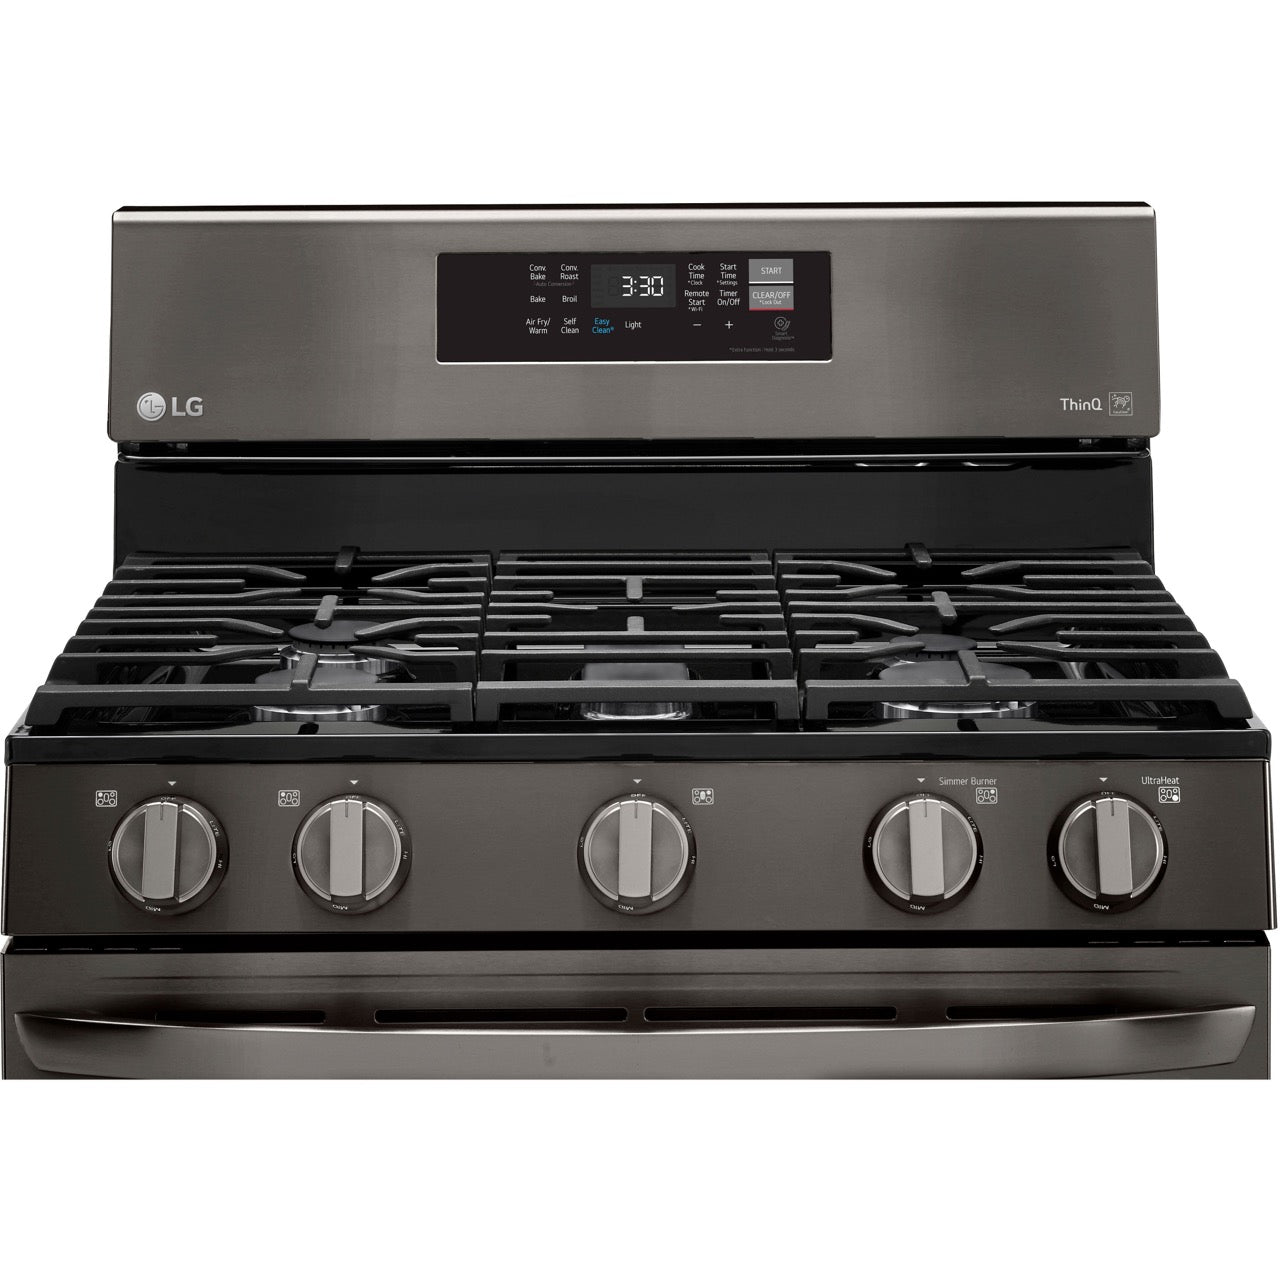 LG 5.8-Cu. Ft. Gas Convection Smart Range with AirFry, Black Stainless Steel (LRGL5823D)